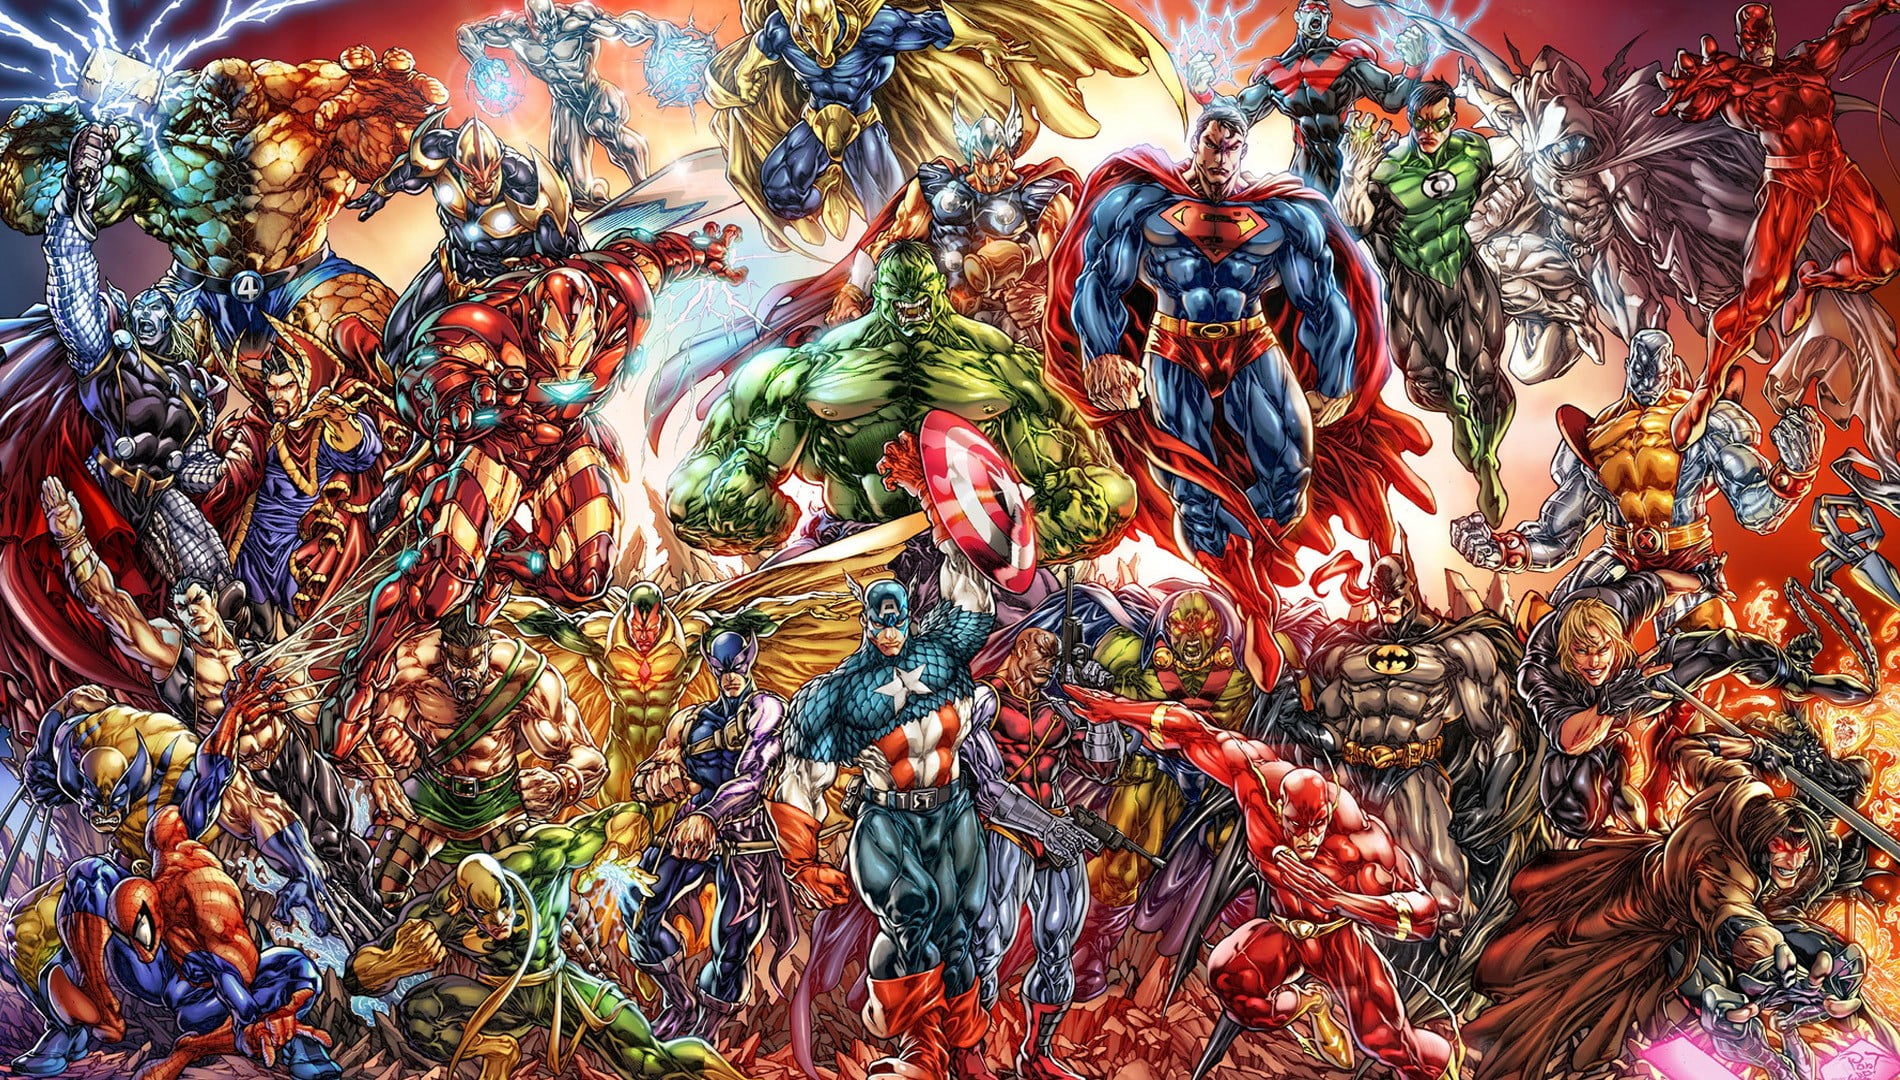 DC and Marvel characters, The Avengers, Spider-Man, Hulk, Wolverine